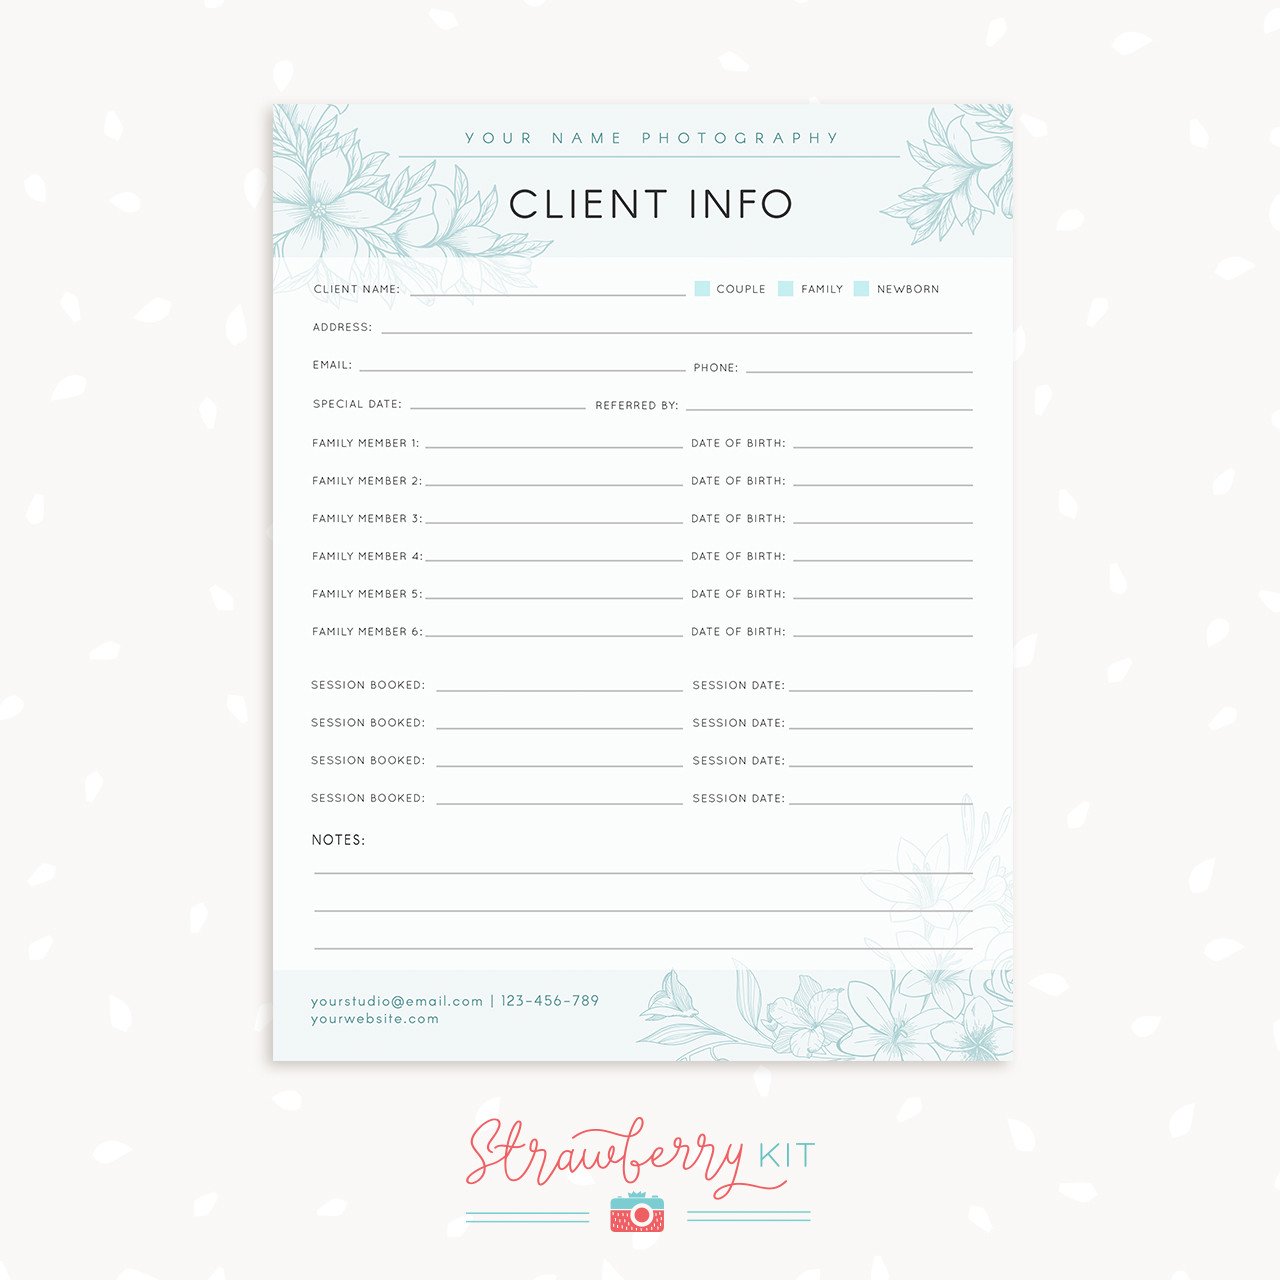 Client Information Template for graphers Strawberry Kit